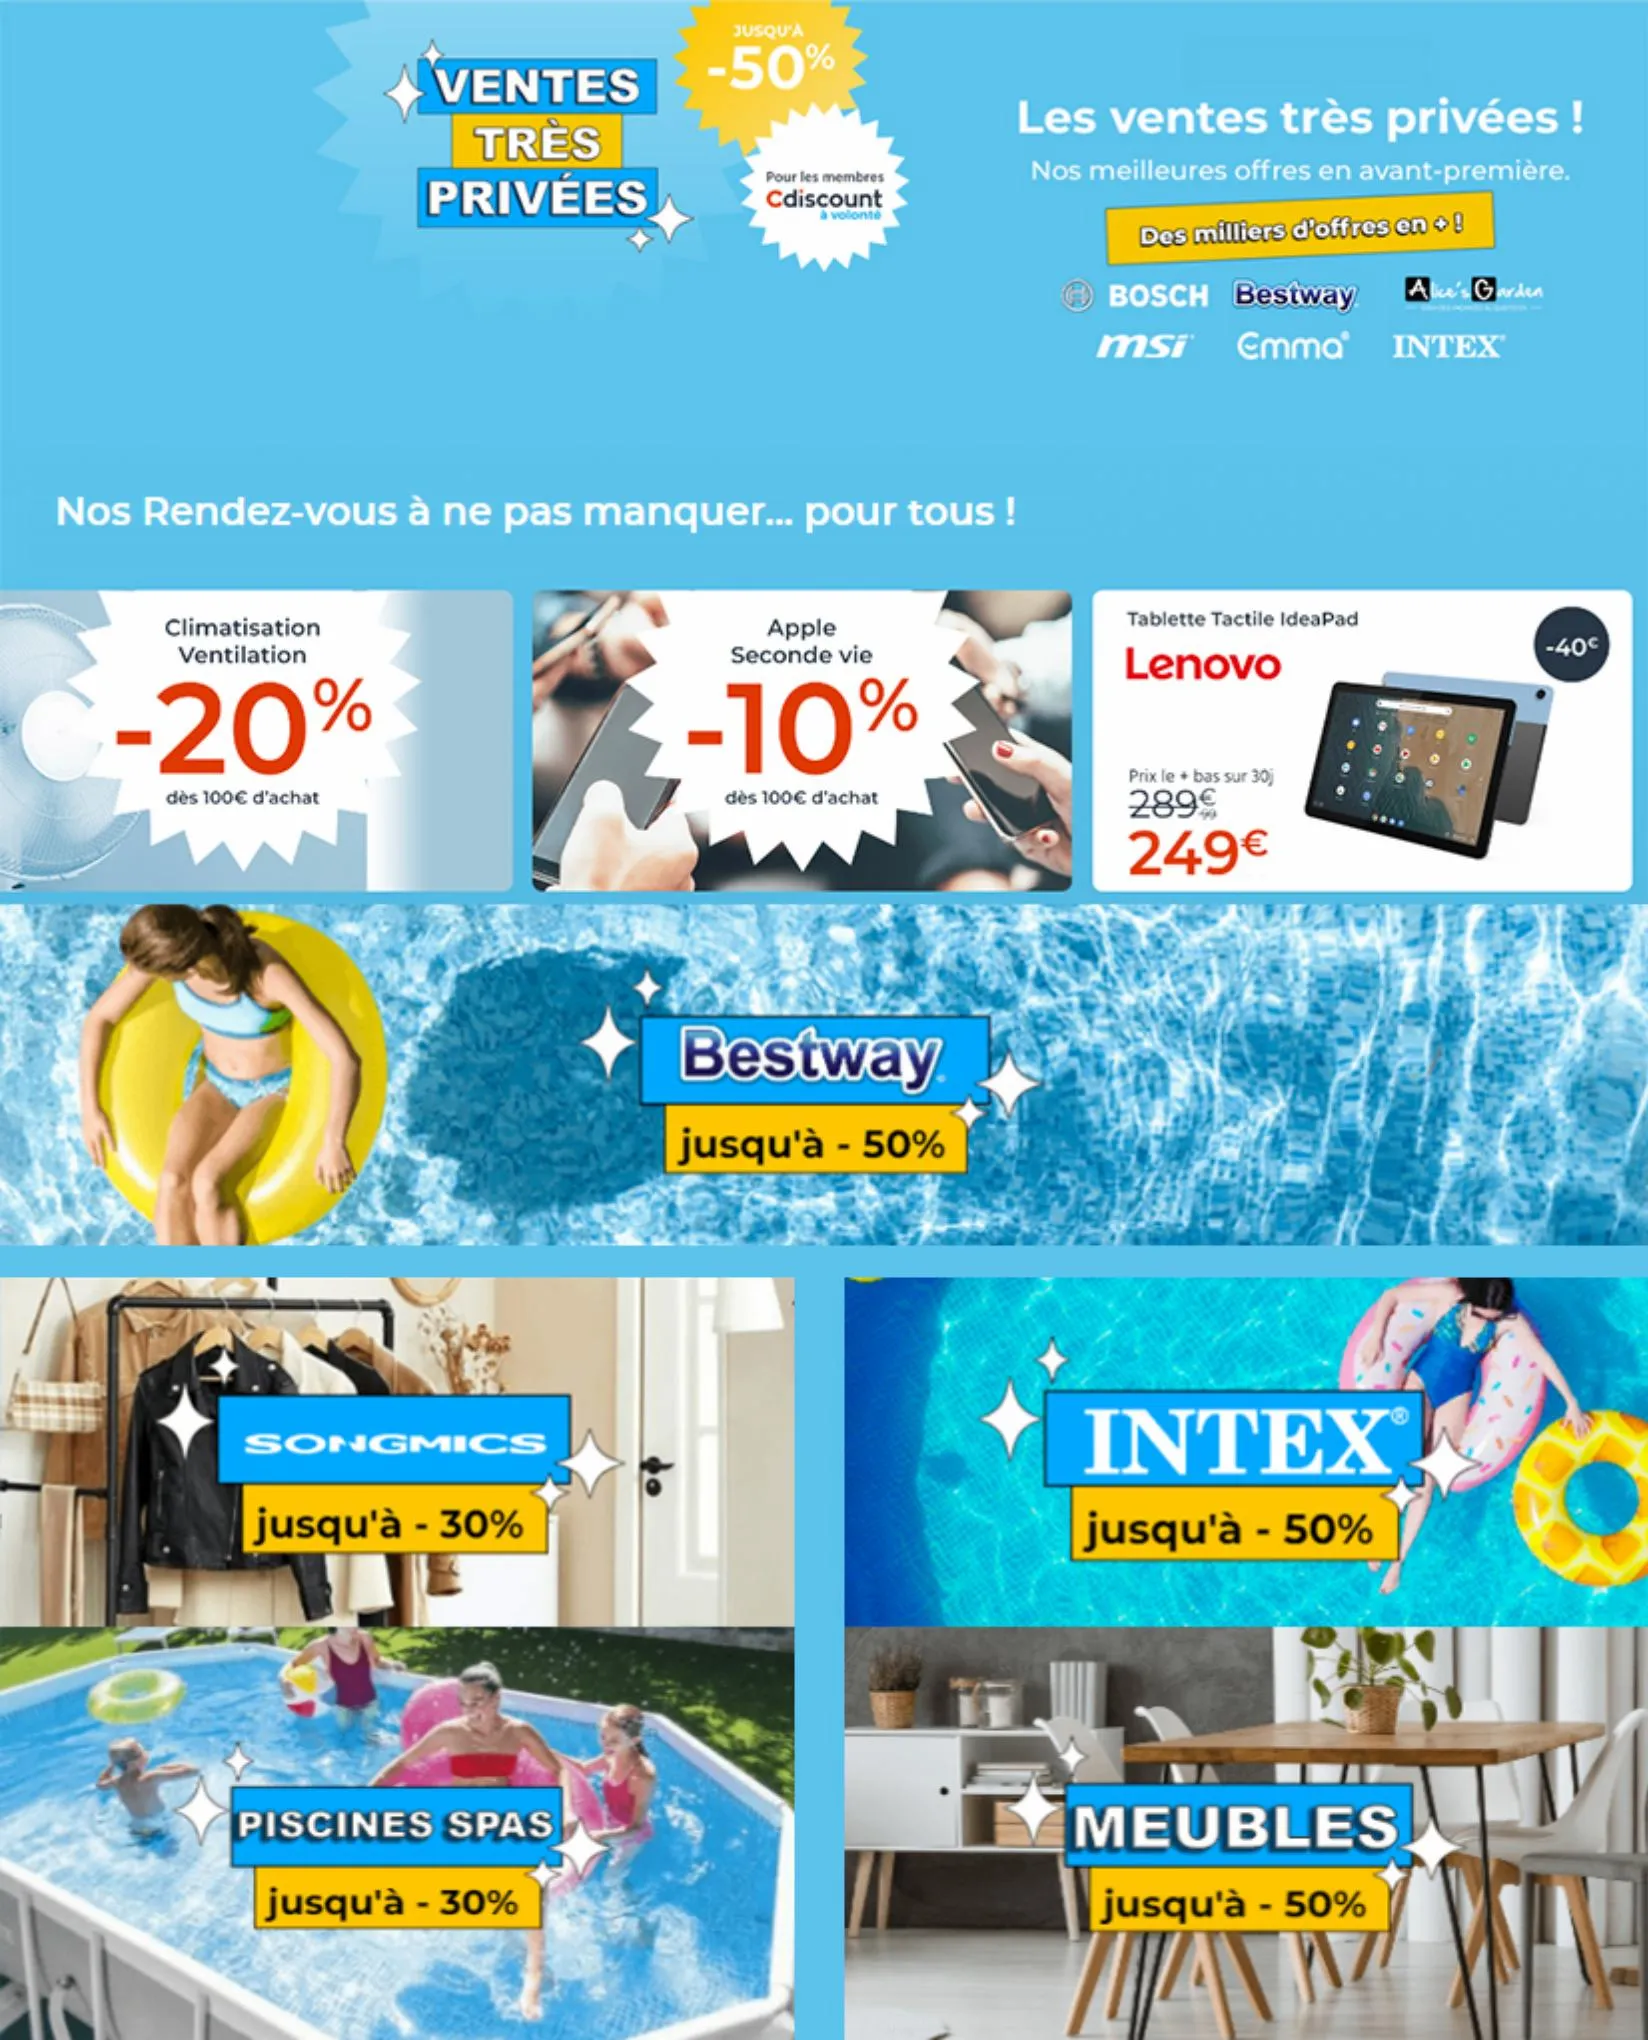 Catalogue Offres Speciales Cdiscount, page 00001